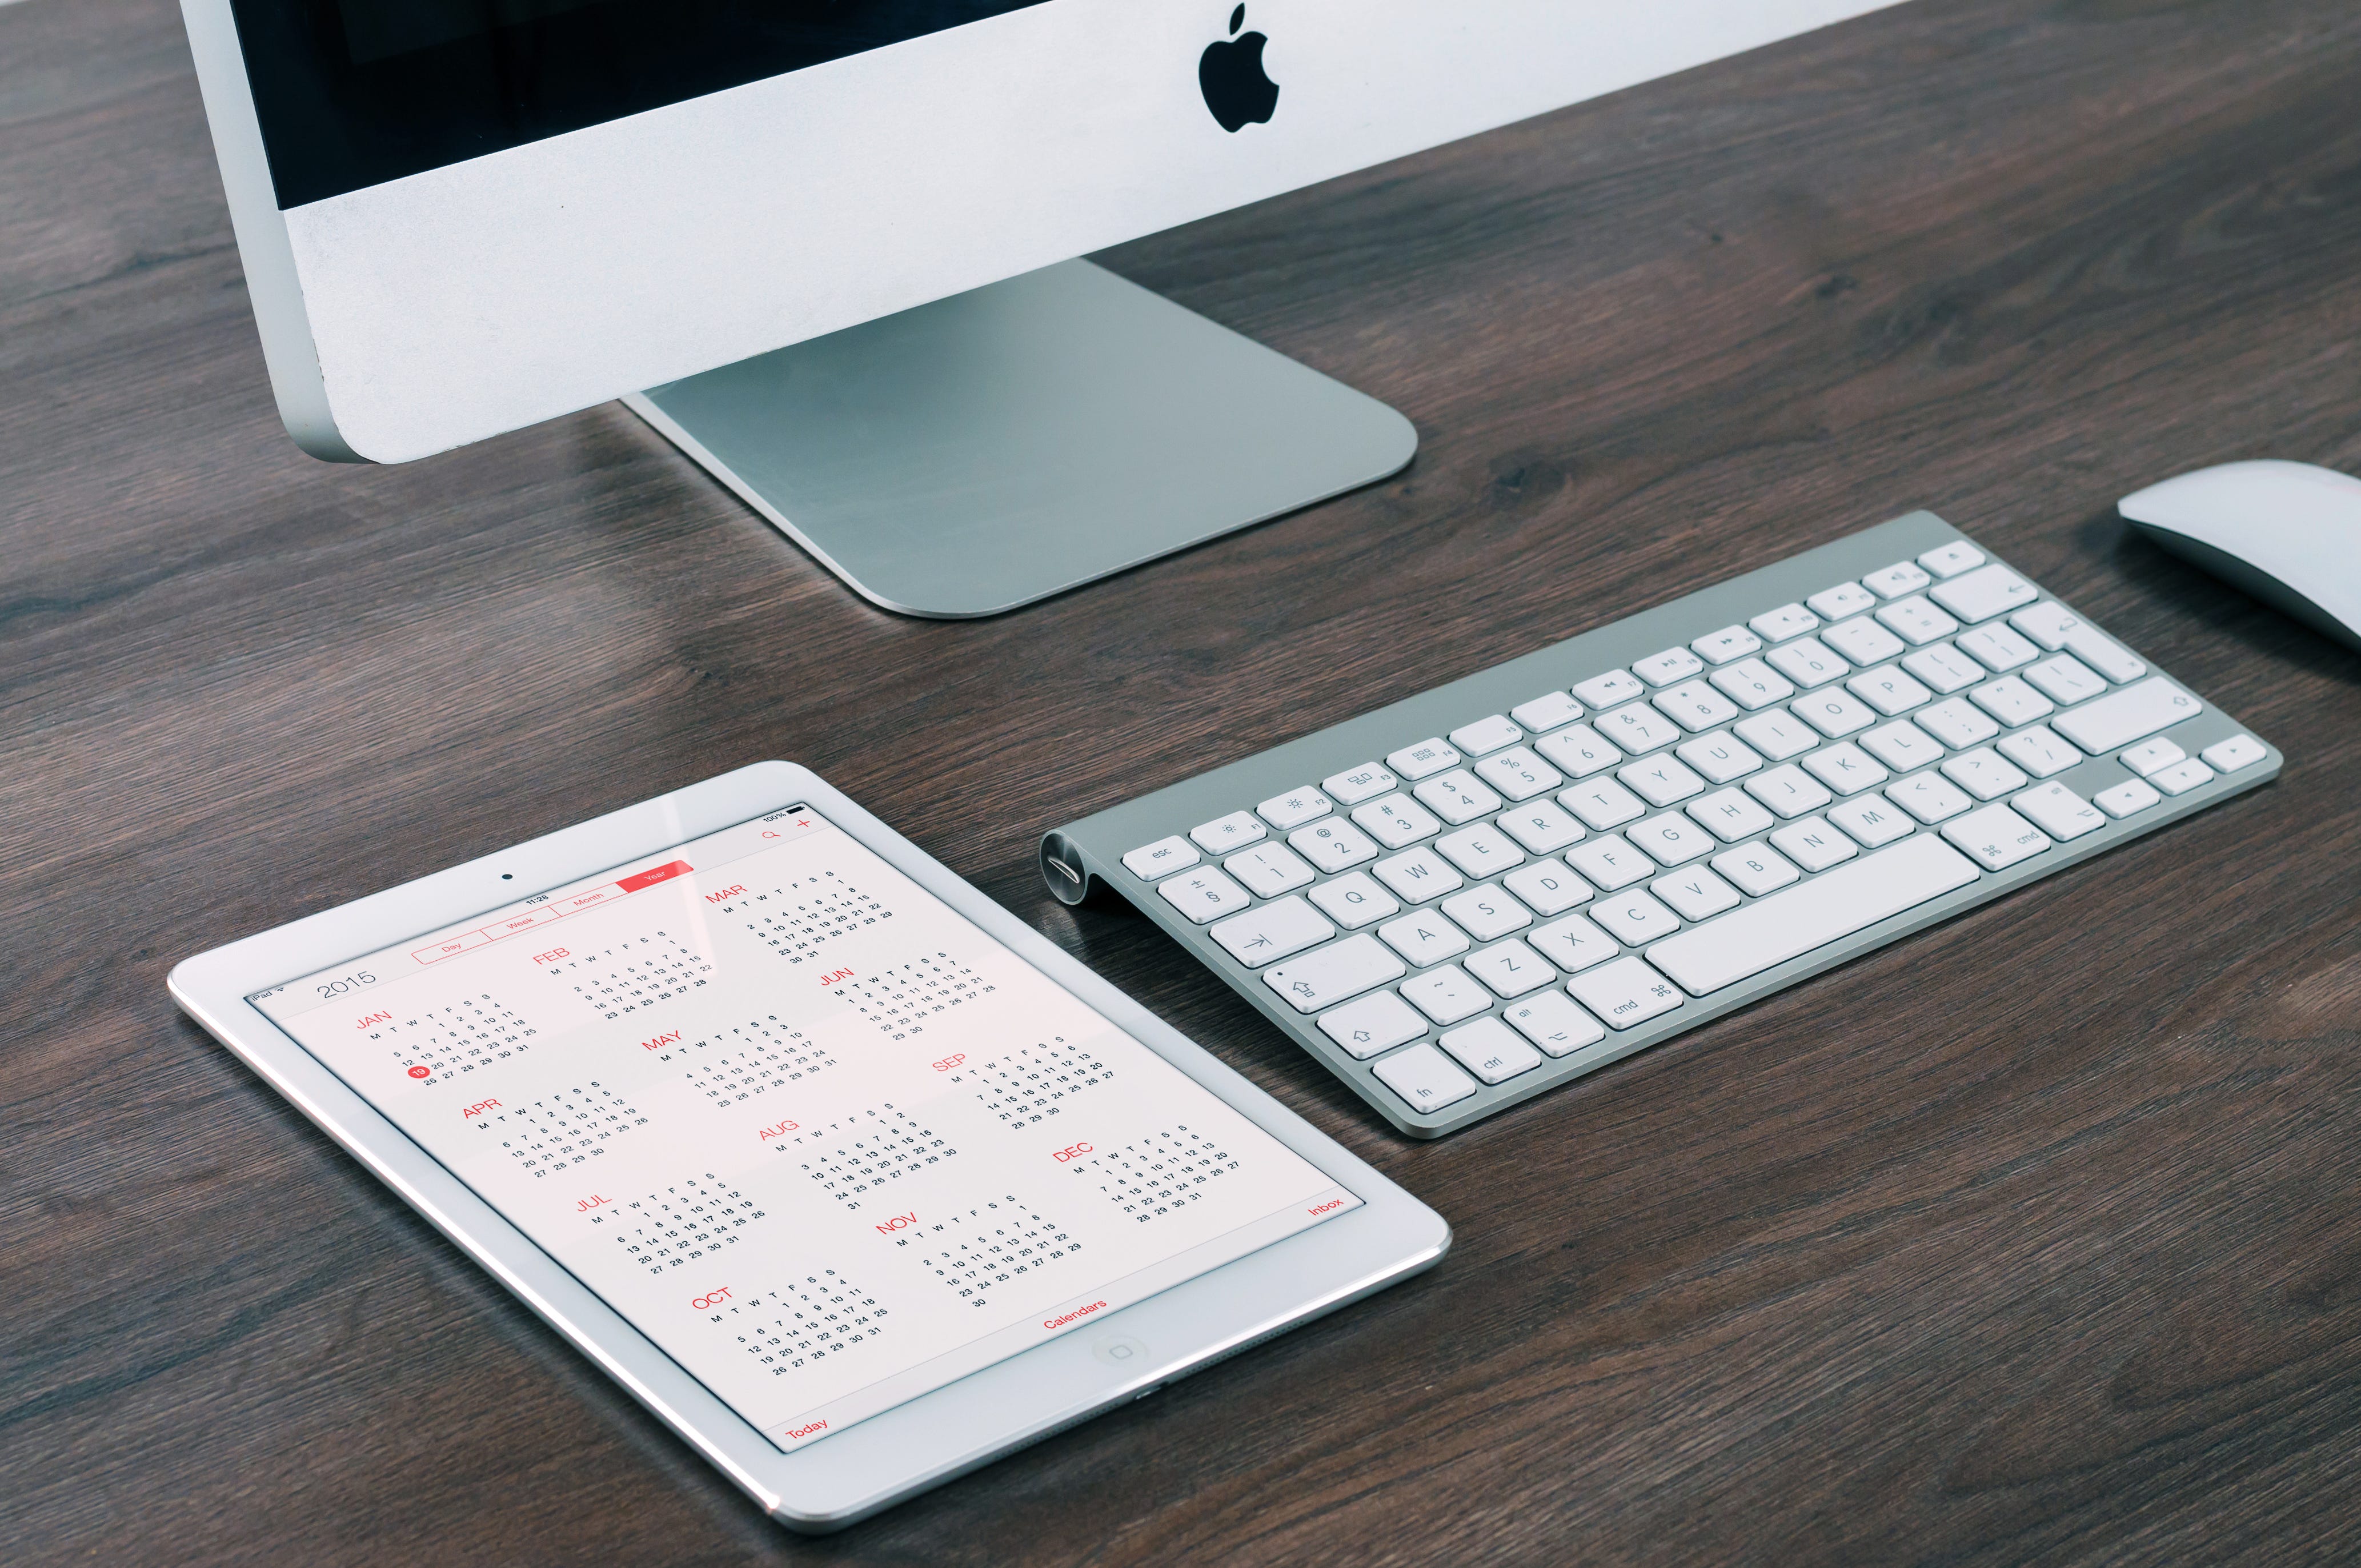 Best Productivity Tools: 6 That Stuck With Me